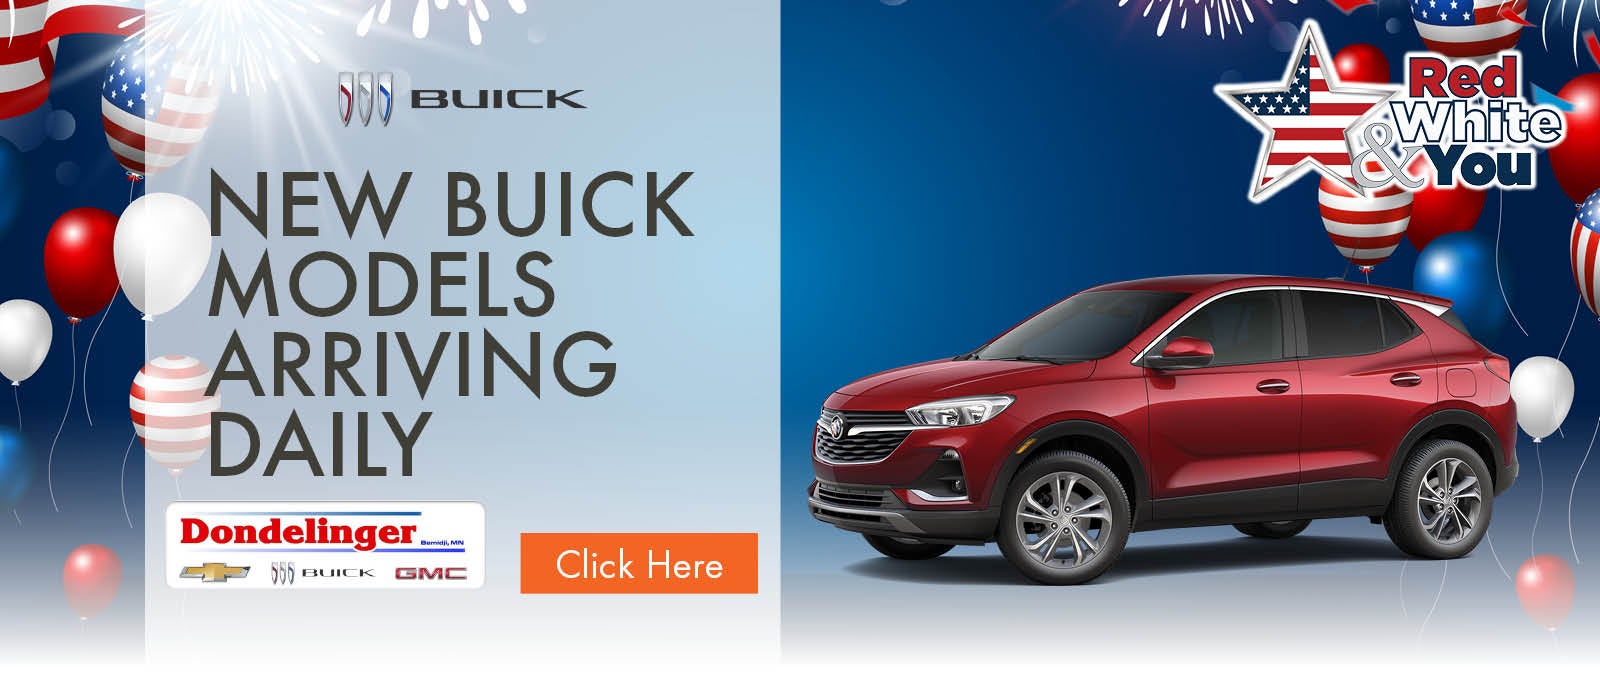 NEW BUICK MODELS ARRIVING DAILY